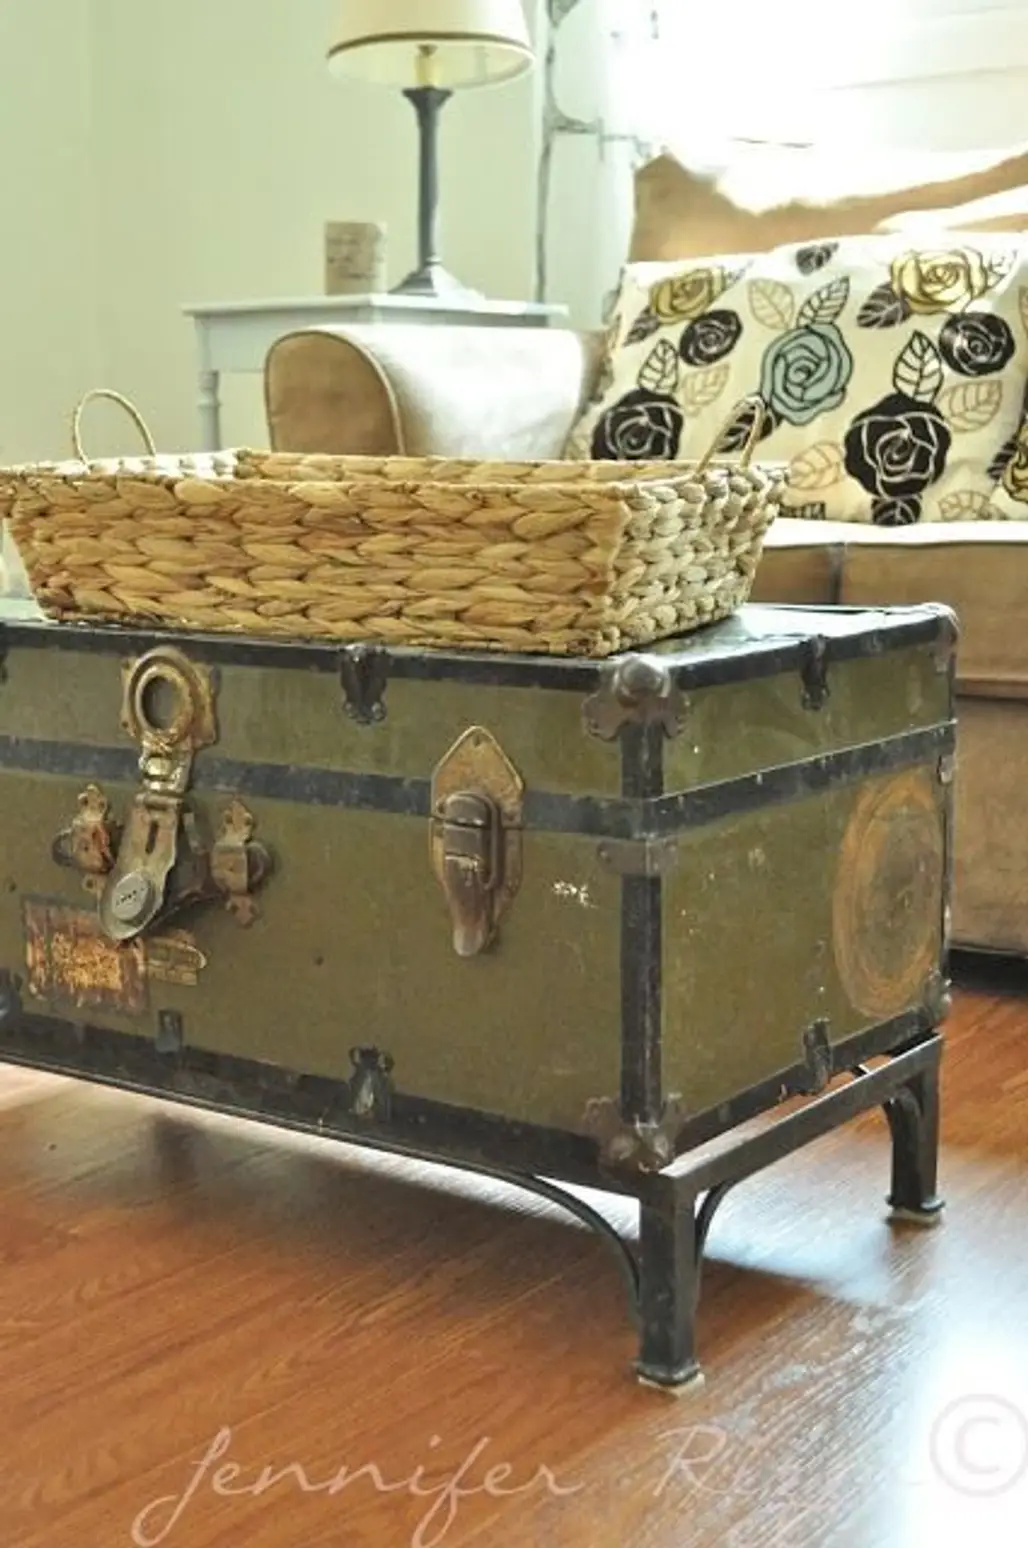 Vintage Trunk as a Coffee Table